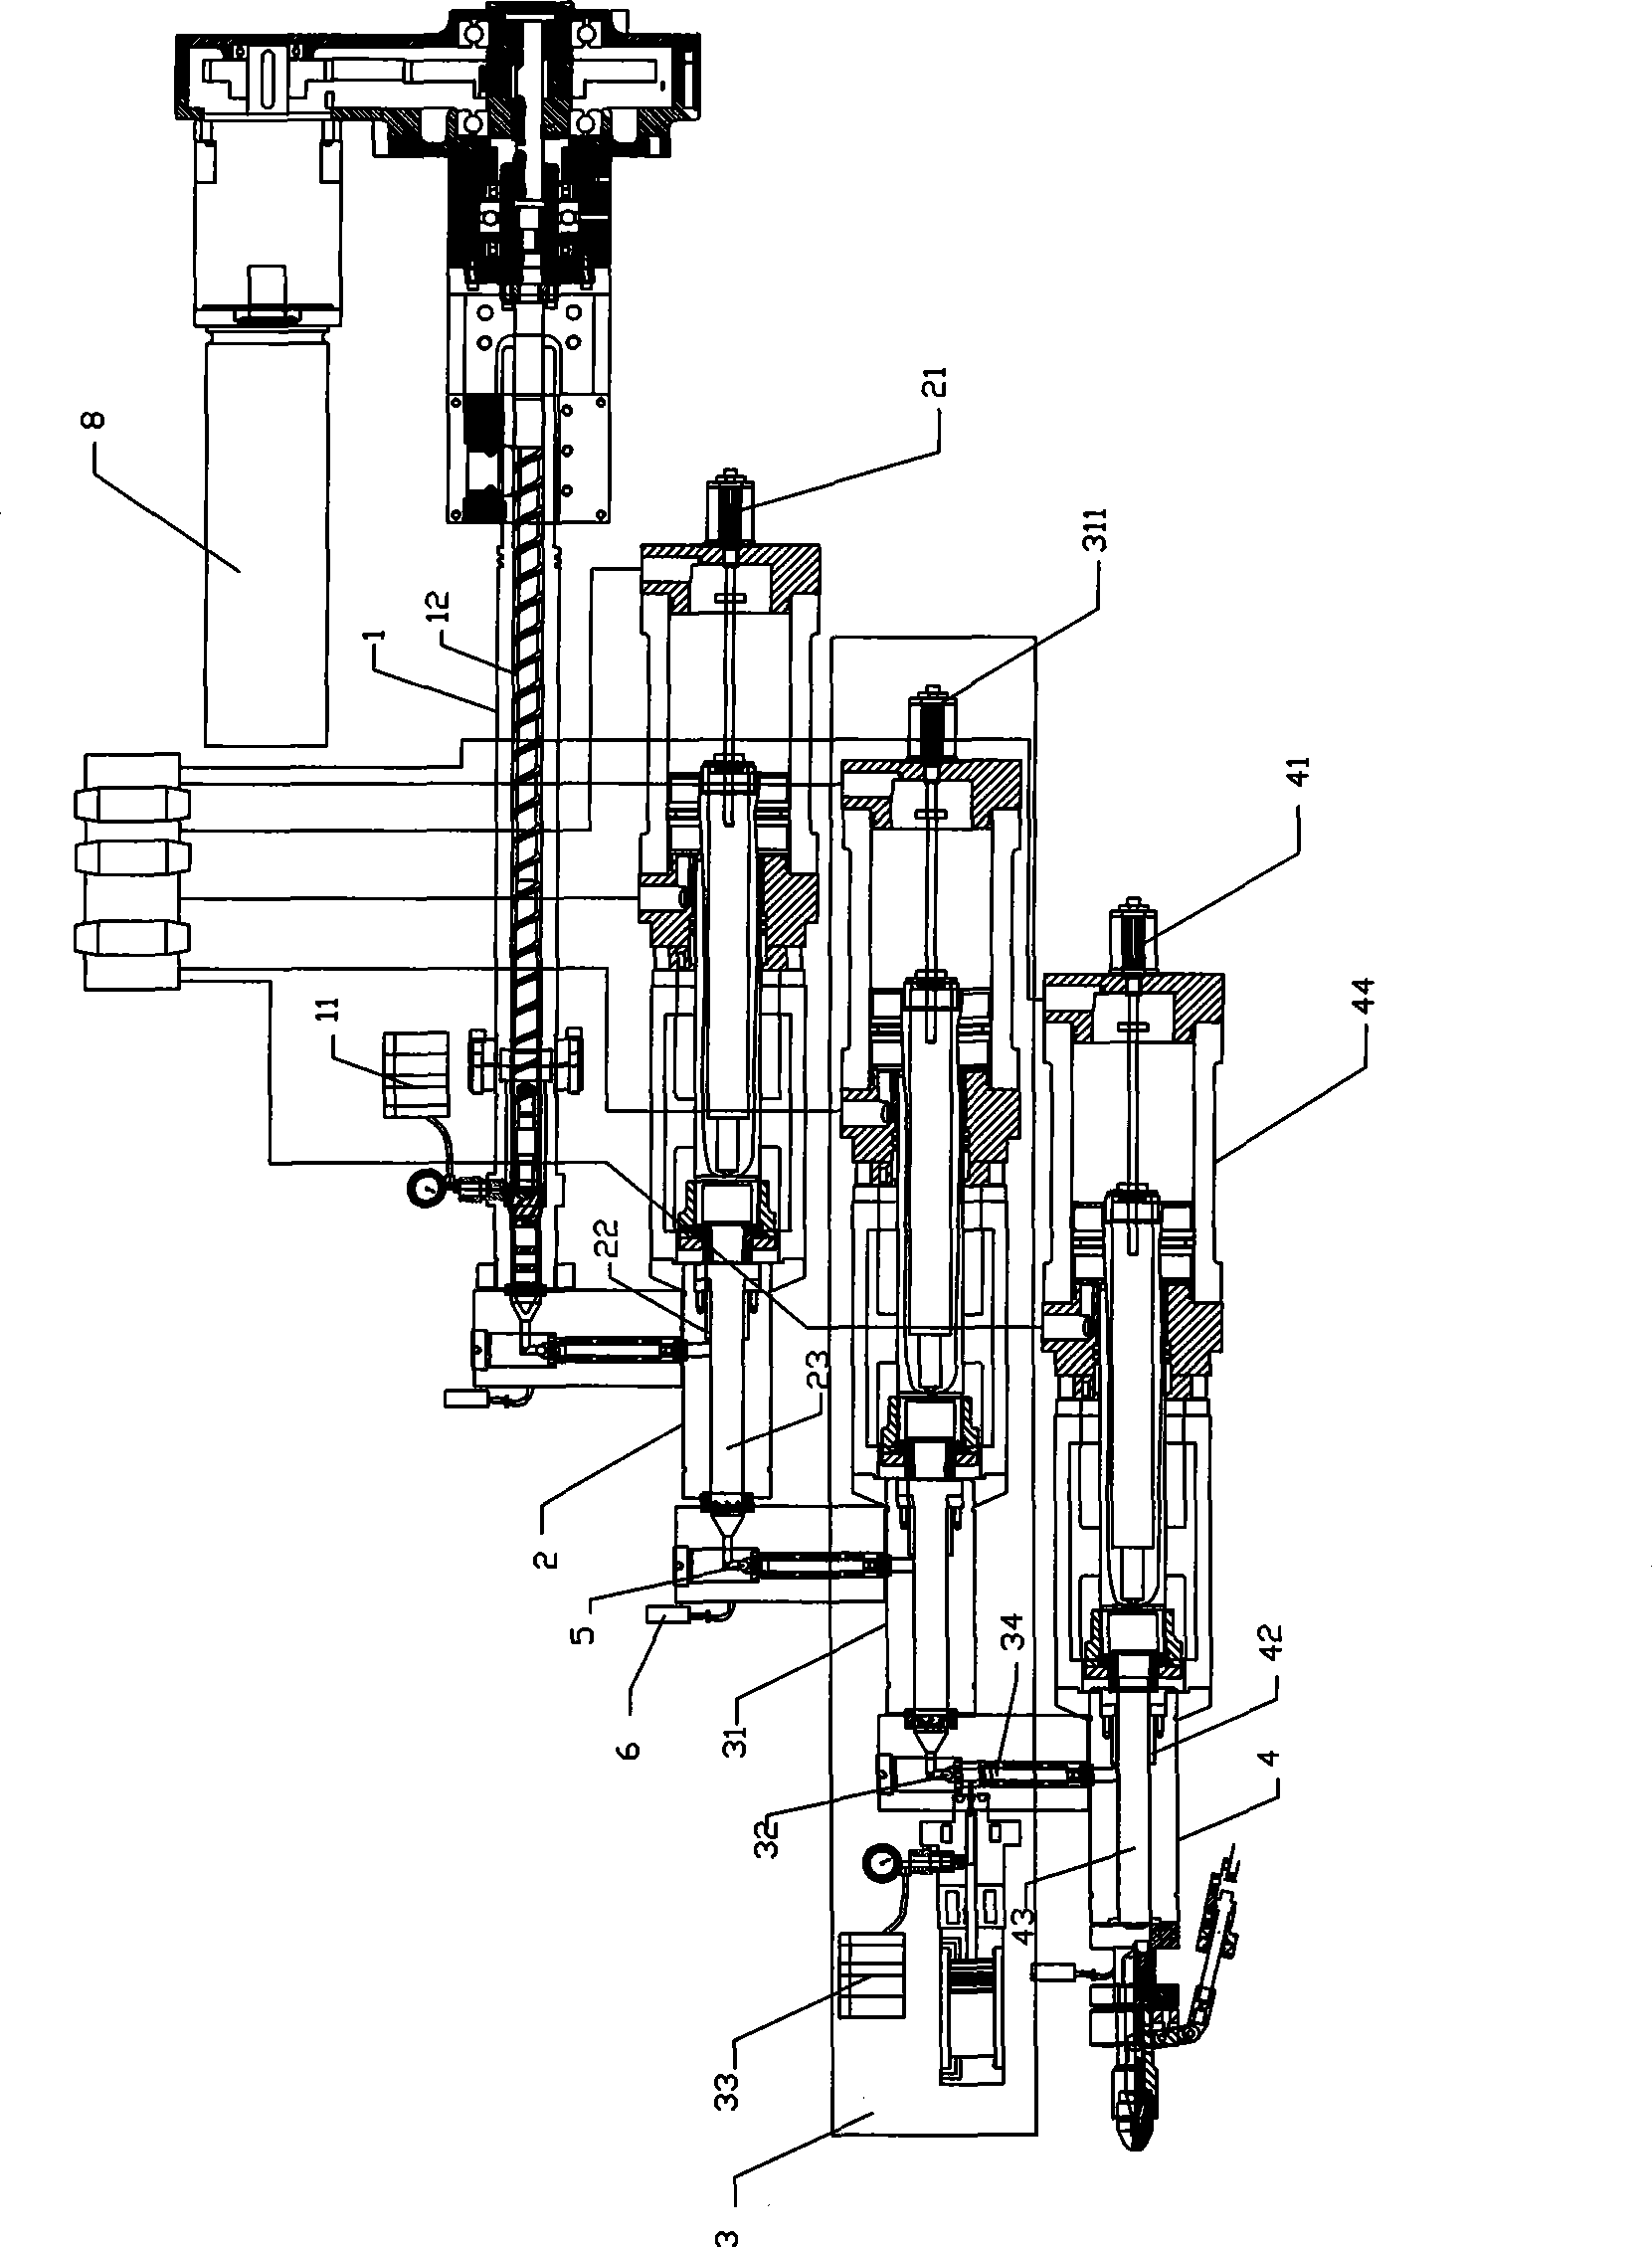 Building board manufacture method and products thereof